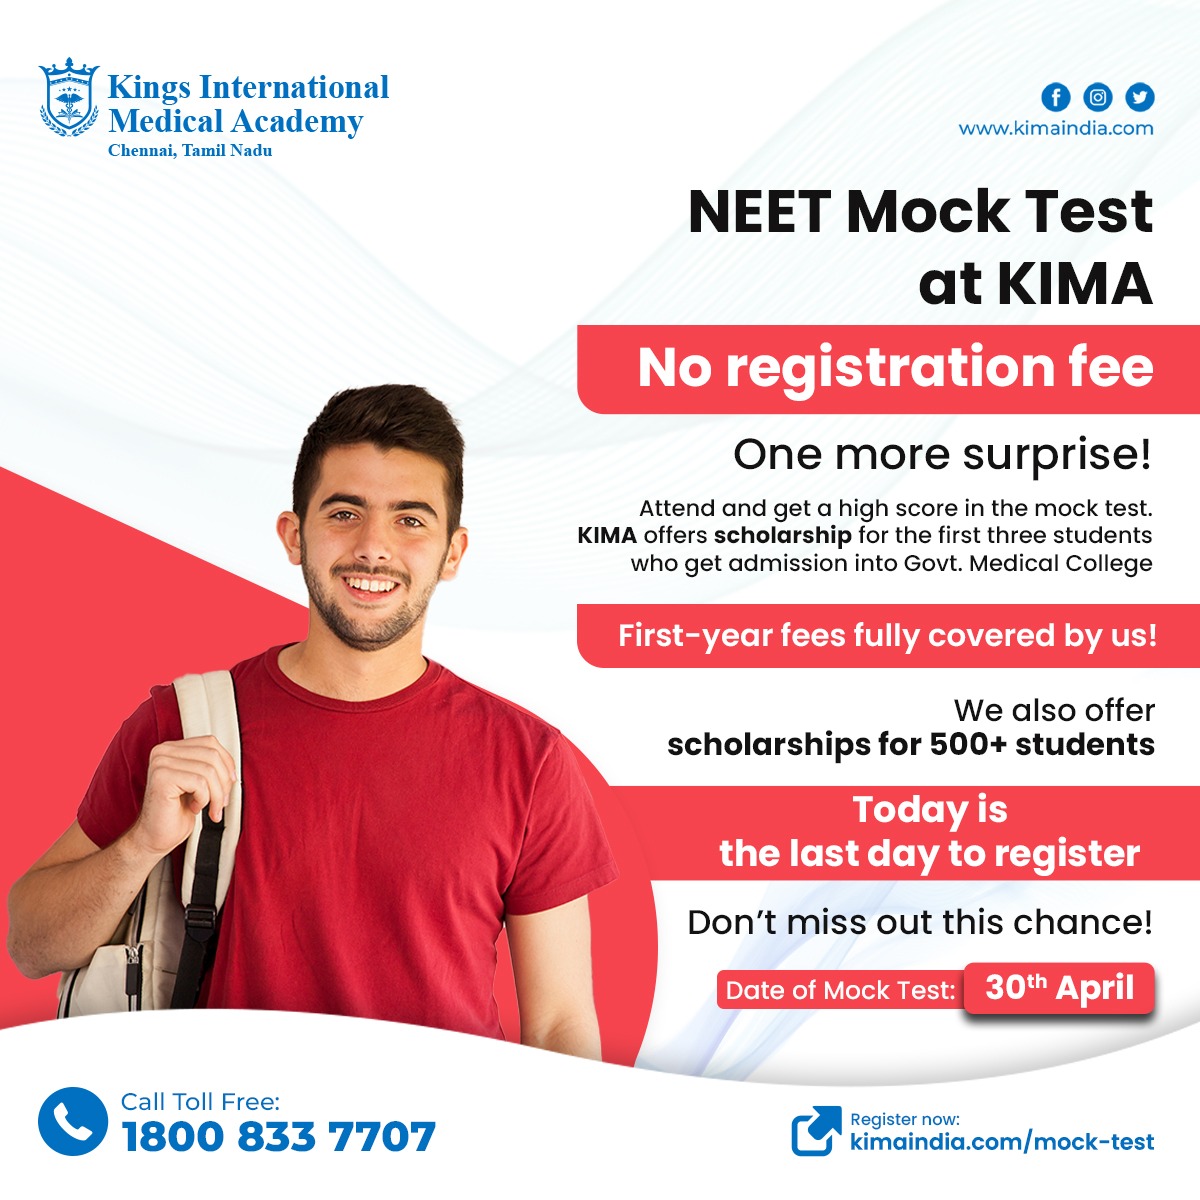 Last Date to Register for our NEET Mock Test